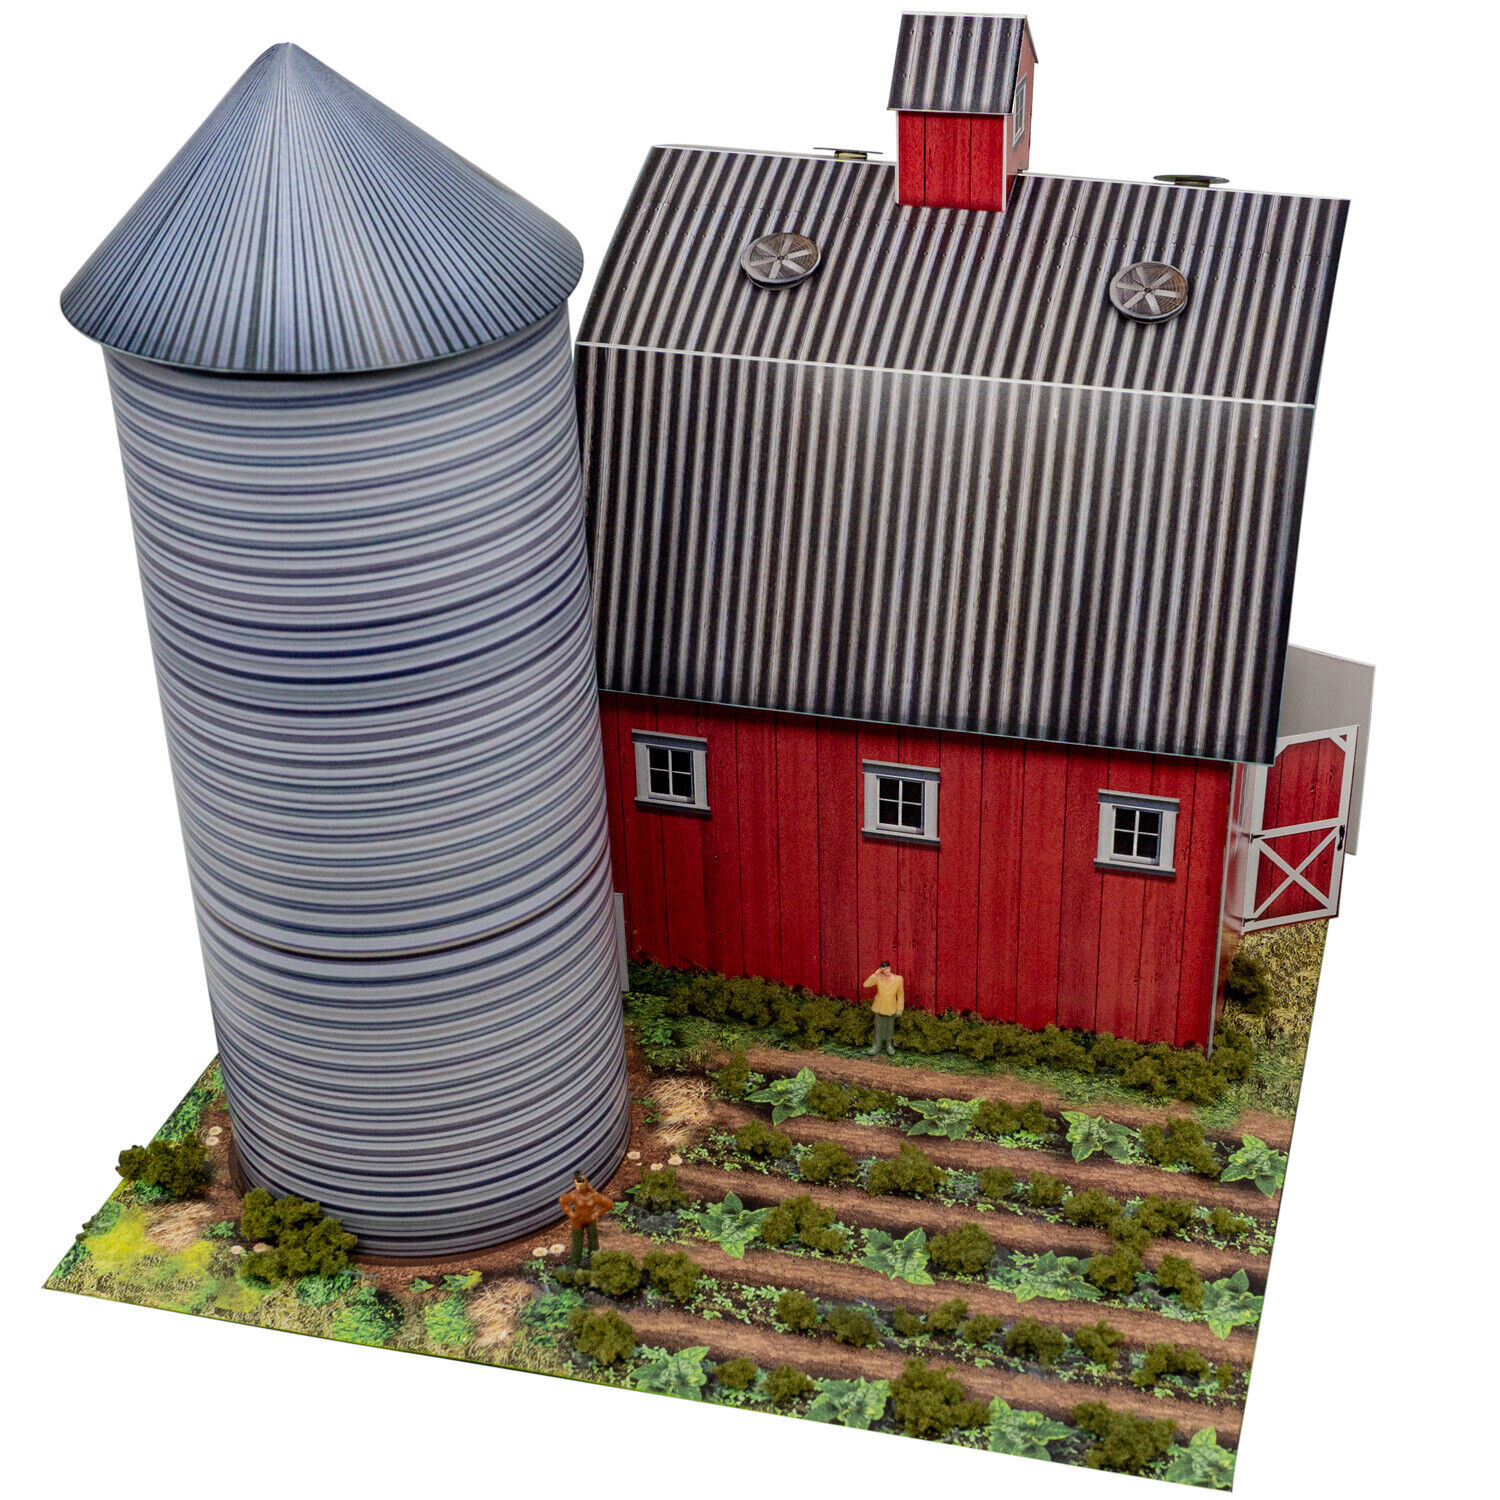 BK 6455 1:64 Scale "Red Barn and Silo" Photo Real Scale Building Kit